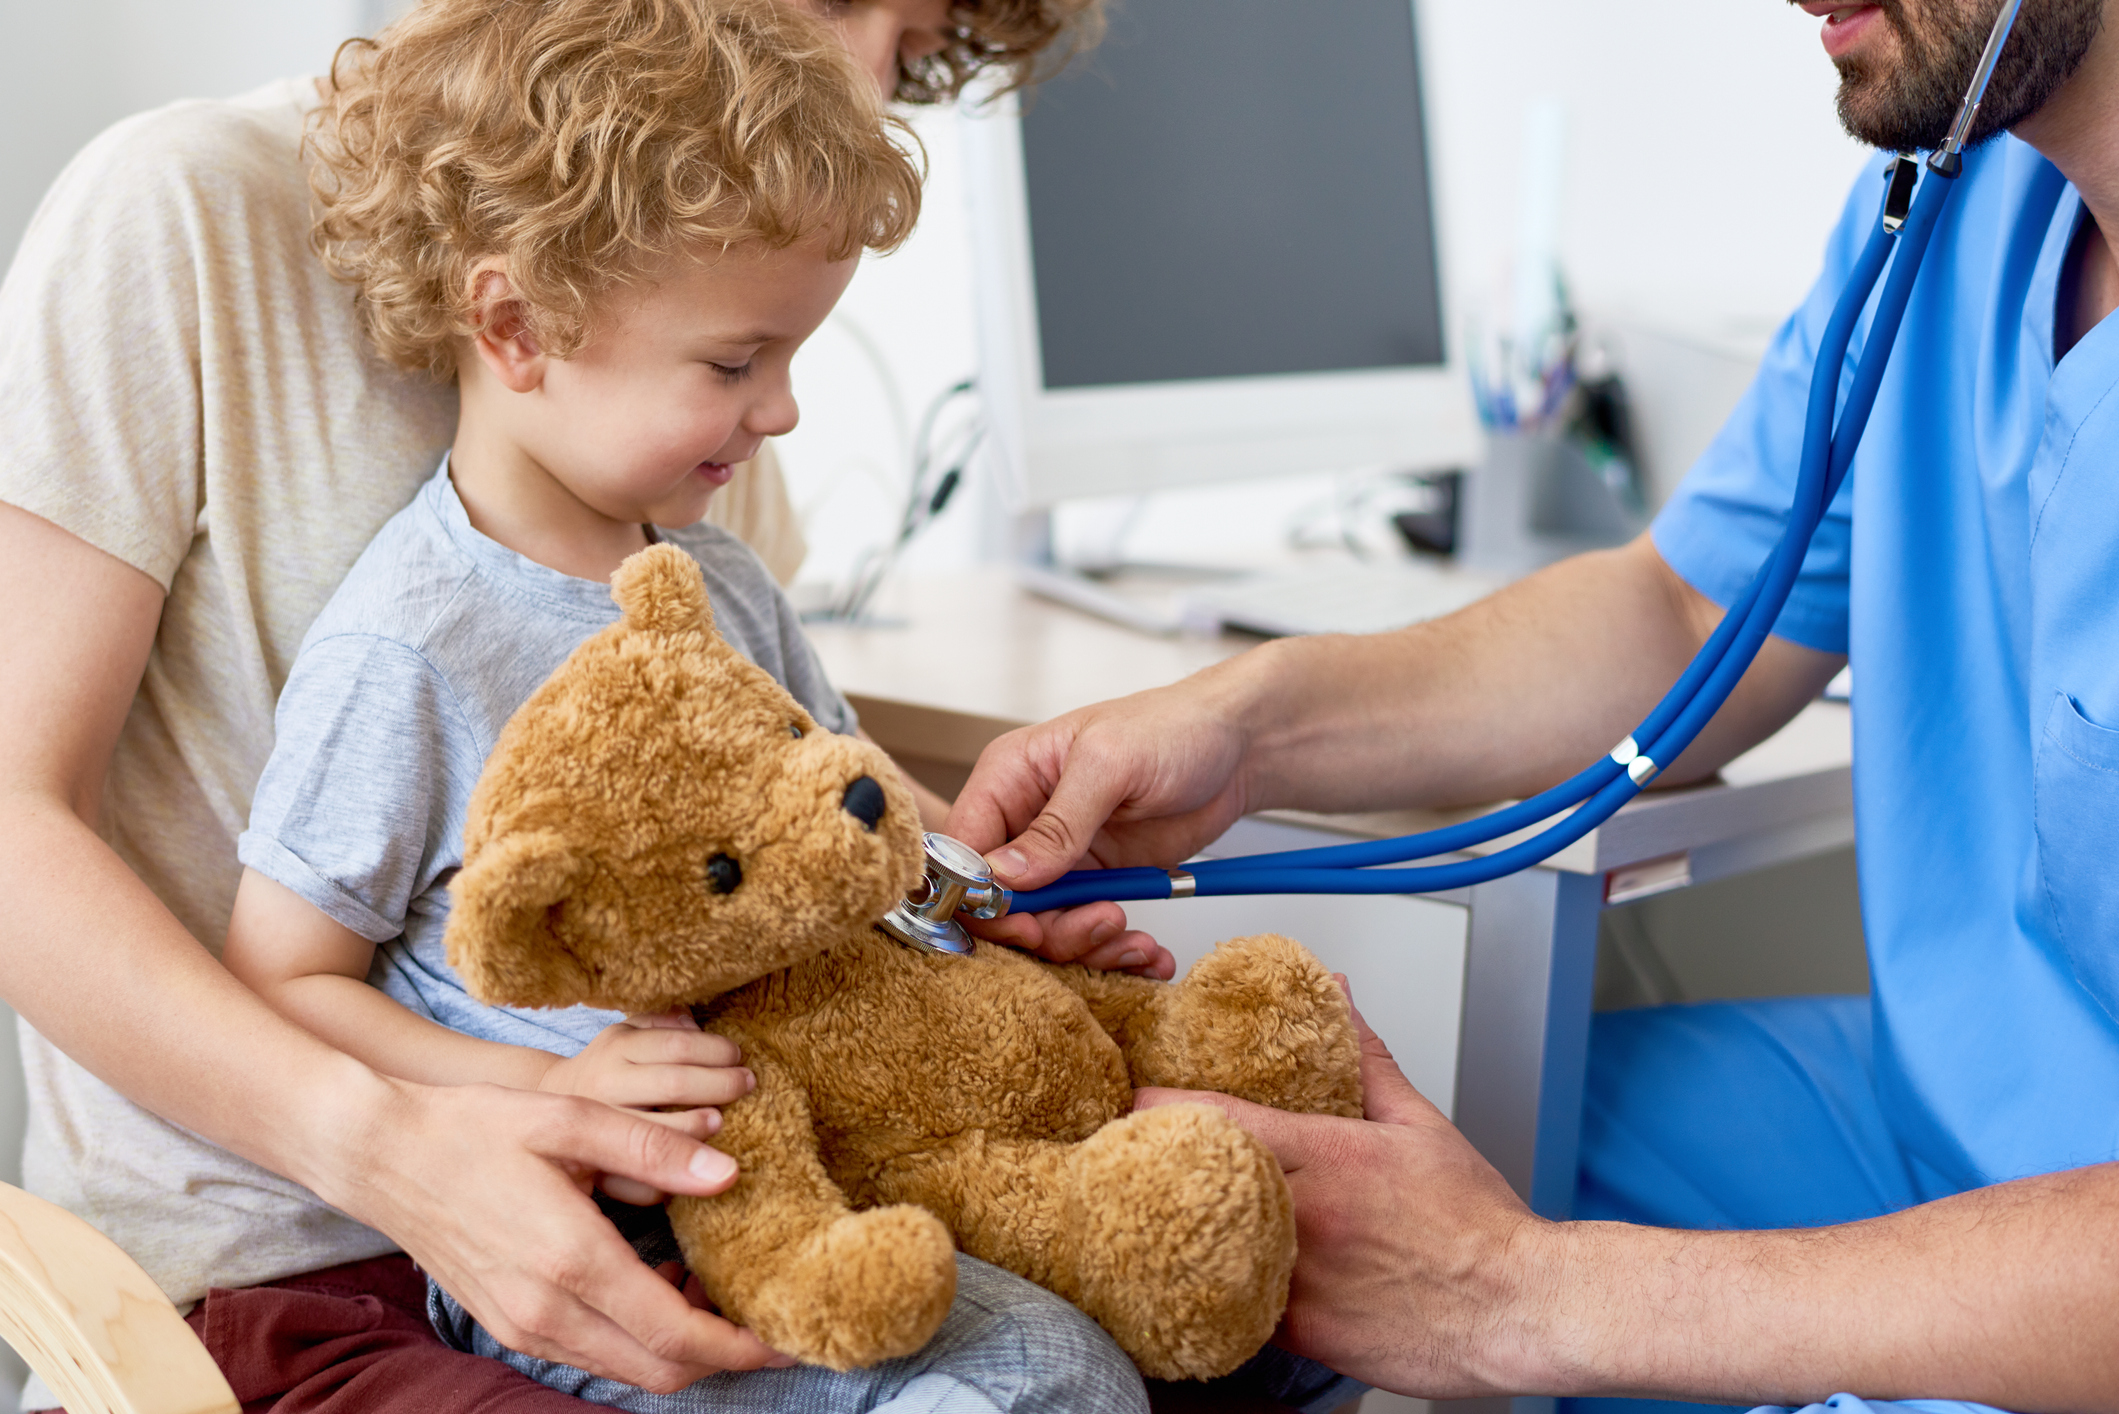 8 Good Questions to Ask Your Pediatrician